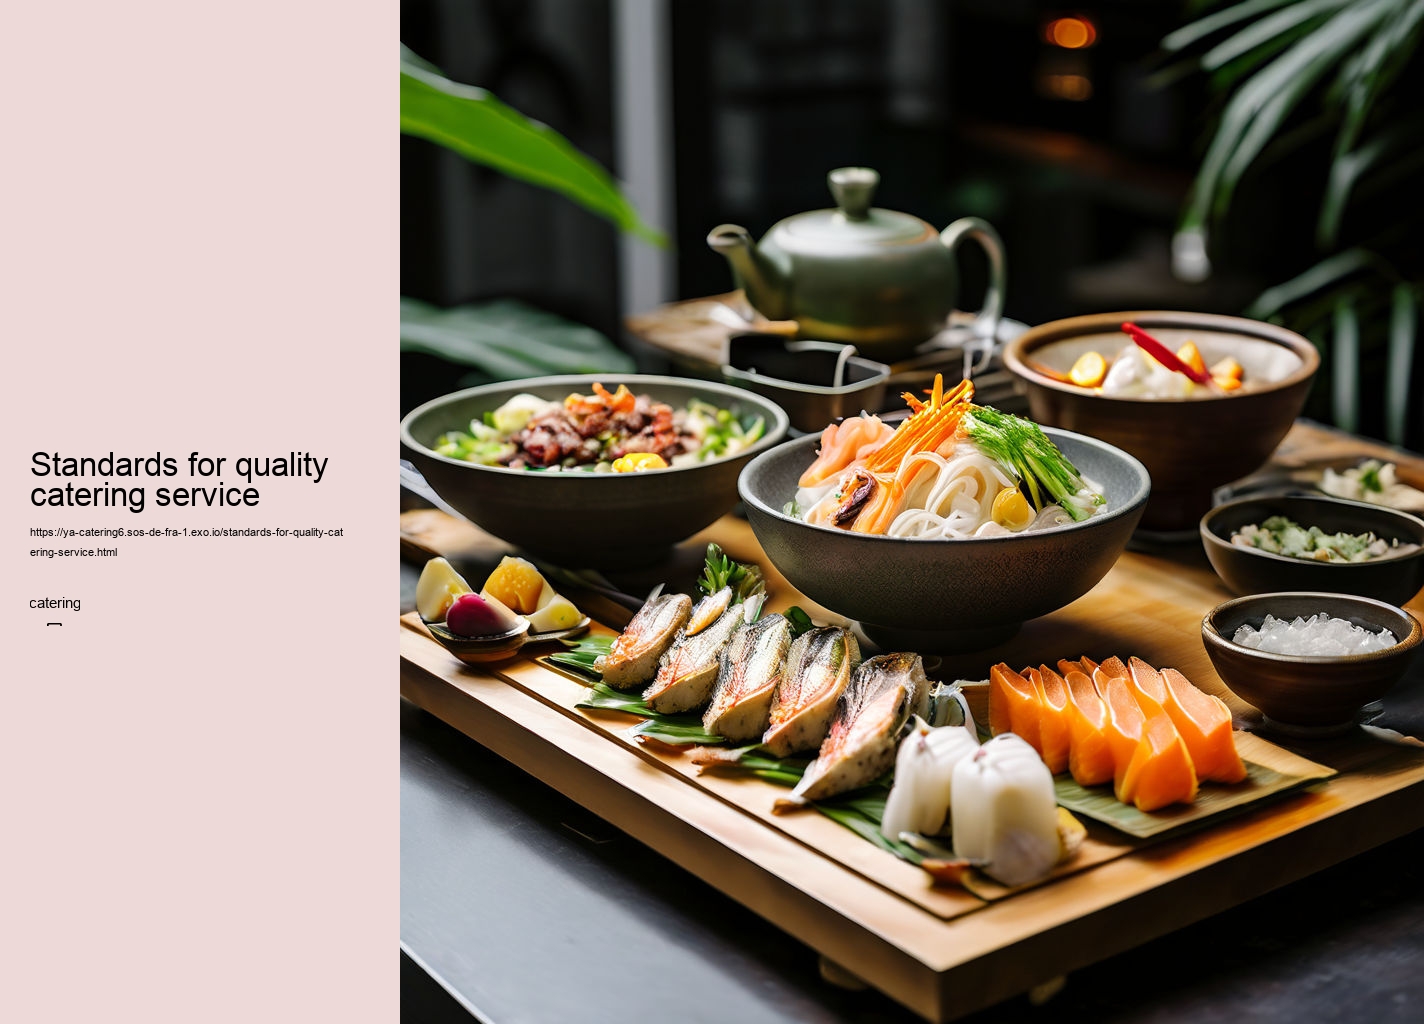 Standards for quality catering service